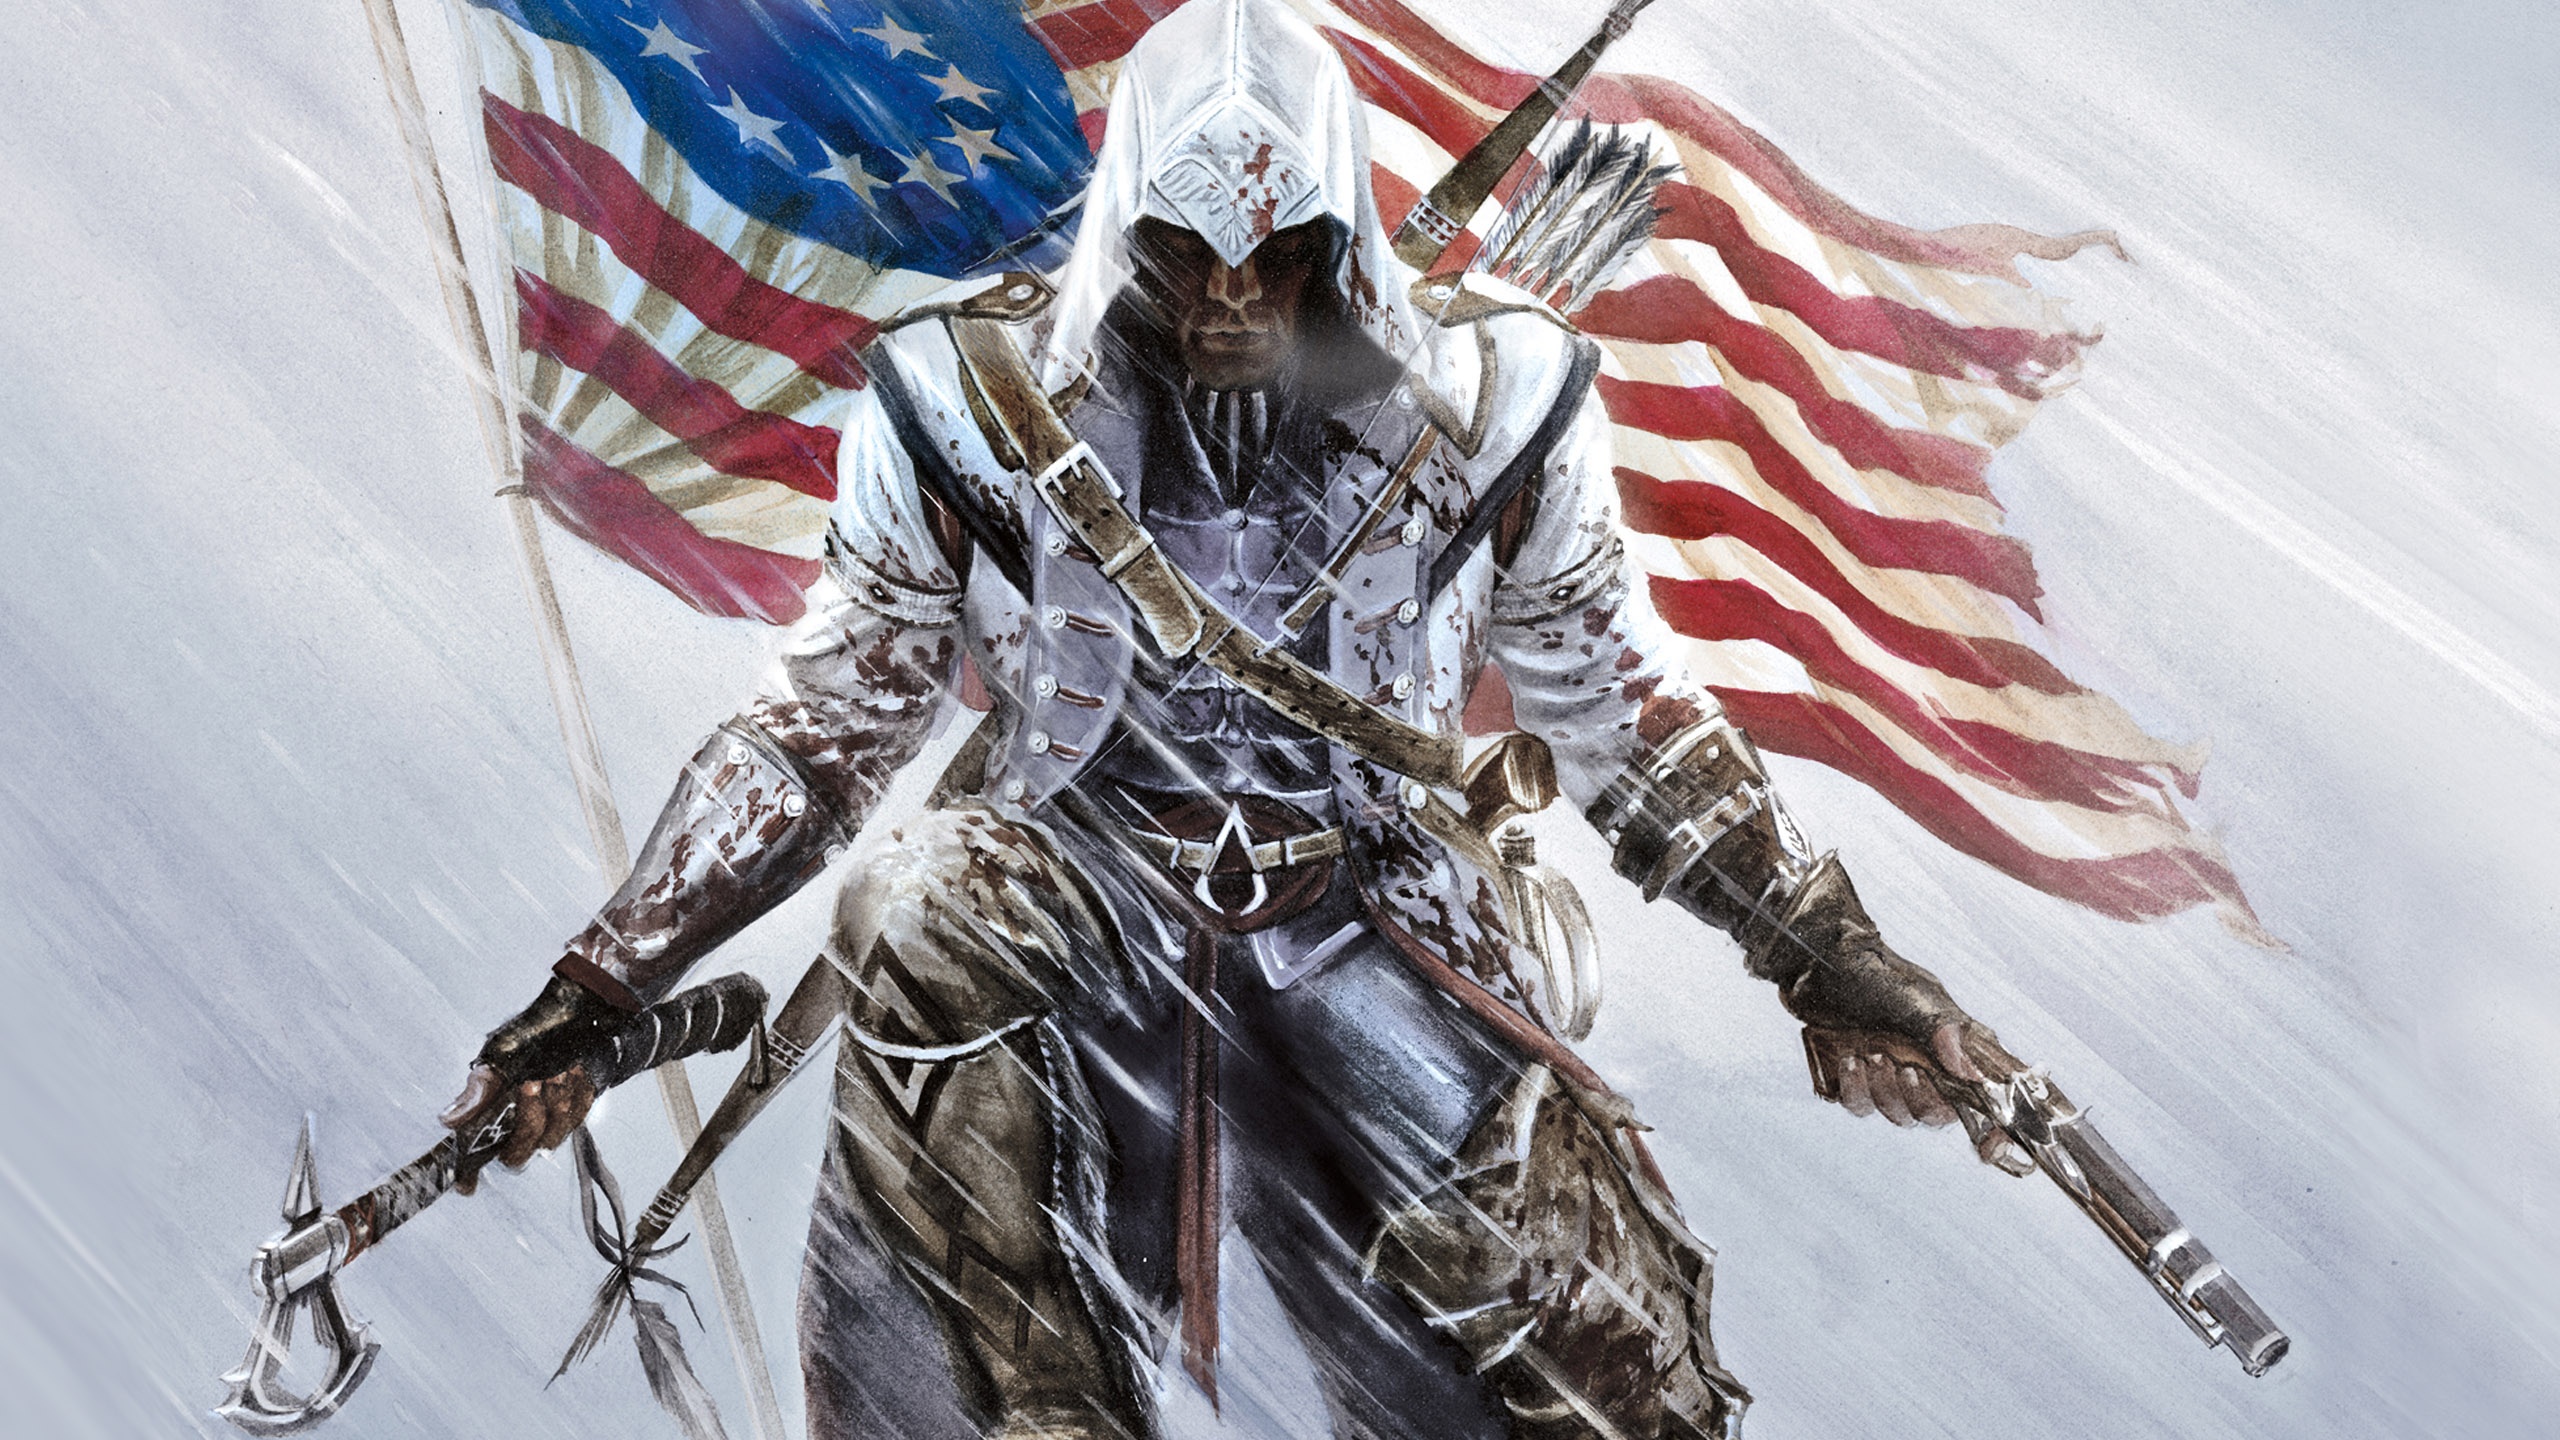  Assassins Creed You are downloading Assassins Creed wallpaper